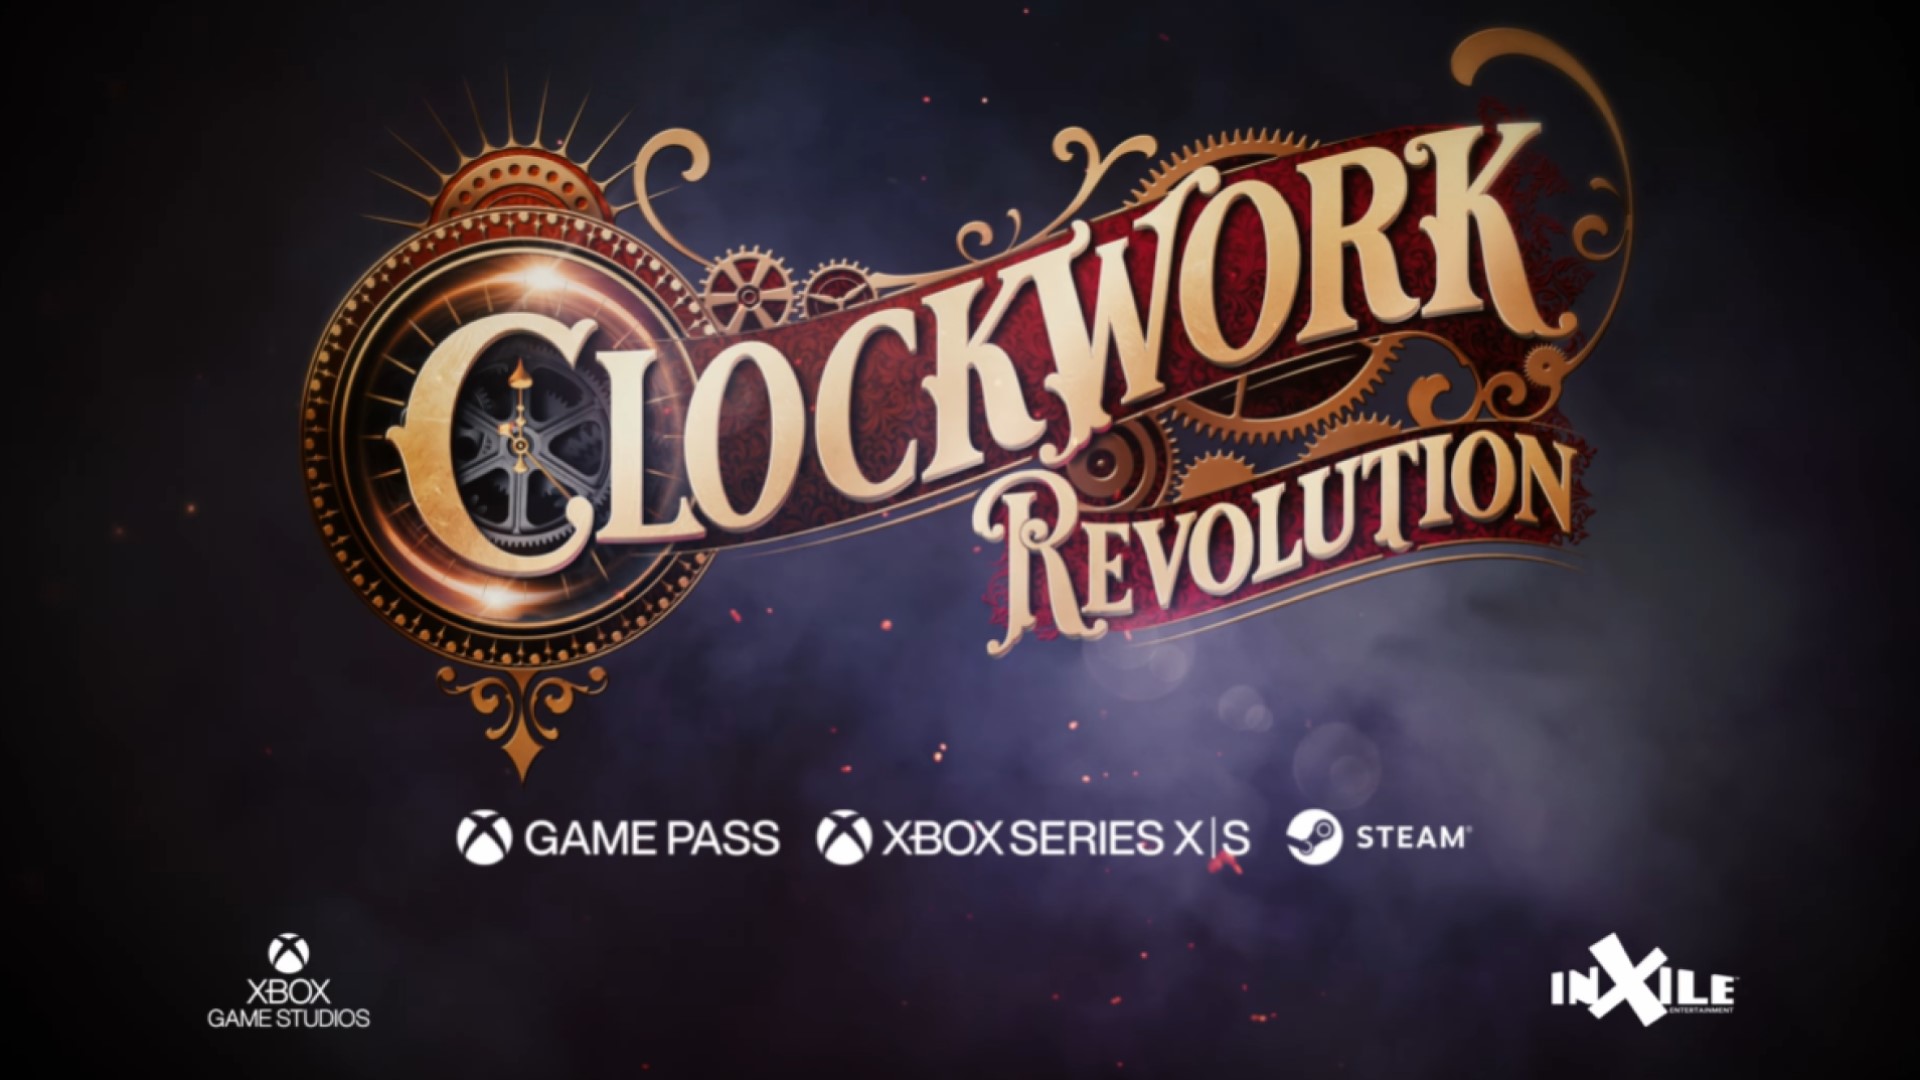 Clockwork Revolution Announced by inXile Entertainment and Xbox